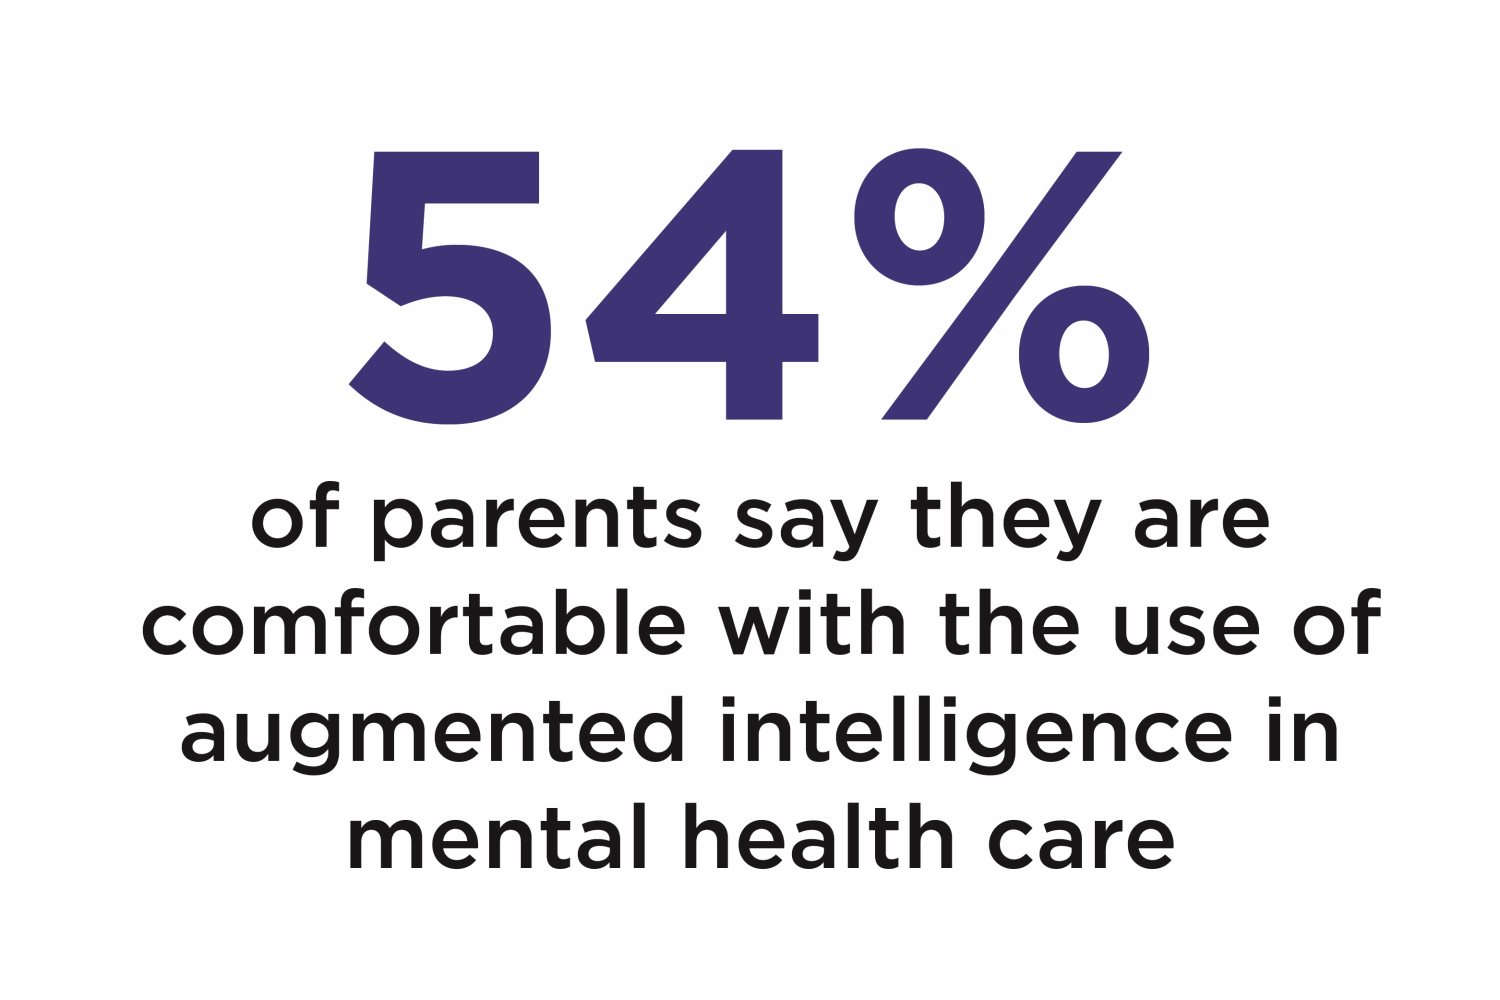 54% of parents say they are comfortable with the use of augmented intelligence in mental health care